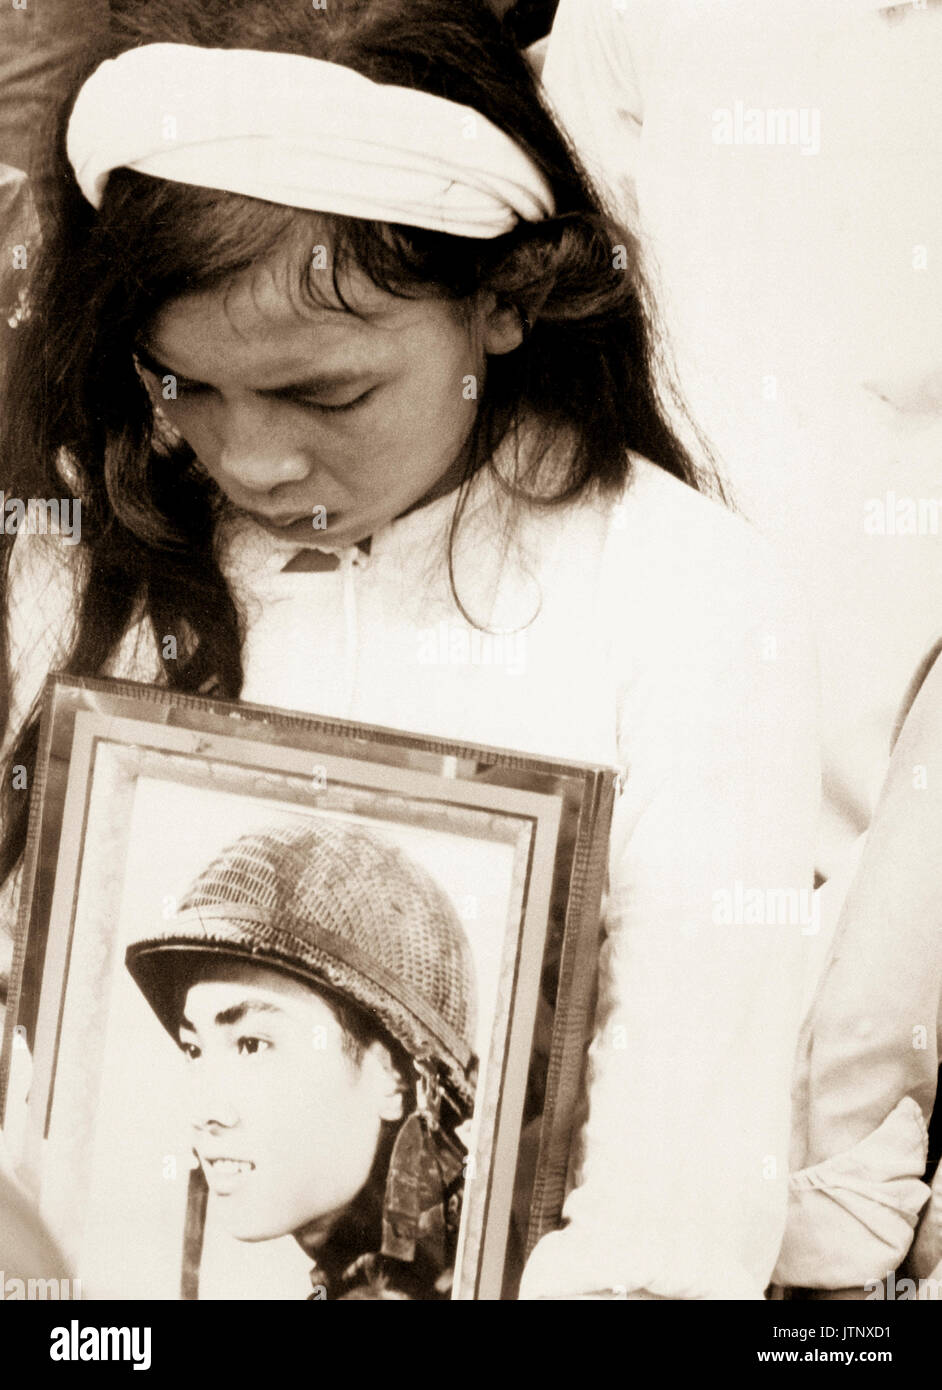 Almost 400 men, women and children massacred by the Viet Cong during 'Tet 1968' were mourned at a common-grave burial on October 14.  This young widow, carrying a photograph of her missing husband, mourns at the mass funeral service.  Hue, 1968.  (USIA) NARA FILE #:  306-MVP-4-8 WAR & CONFLICT BOOK #:  427 Stock Photo